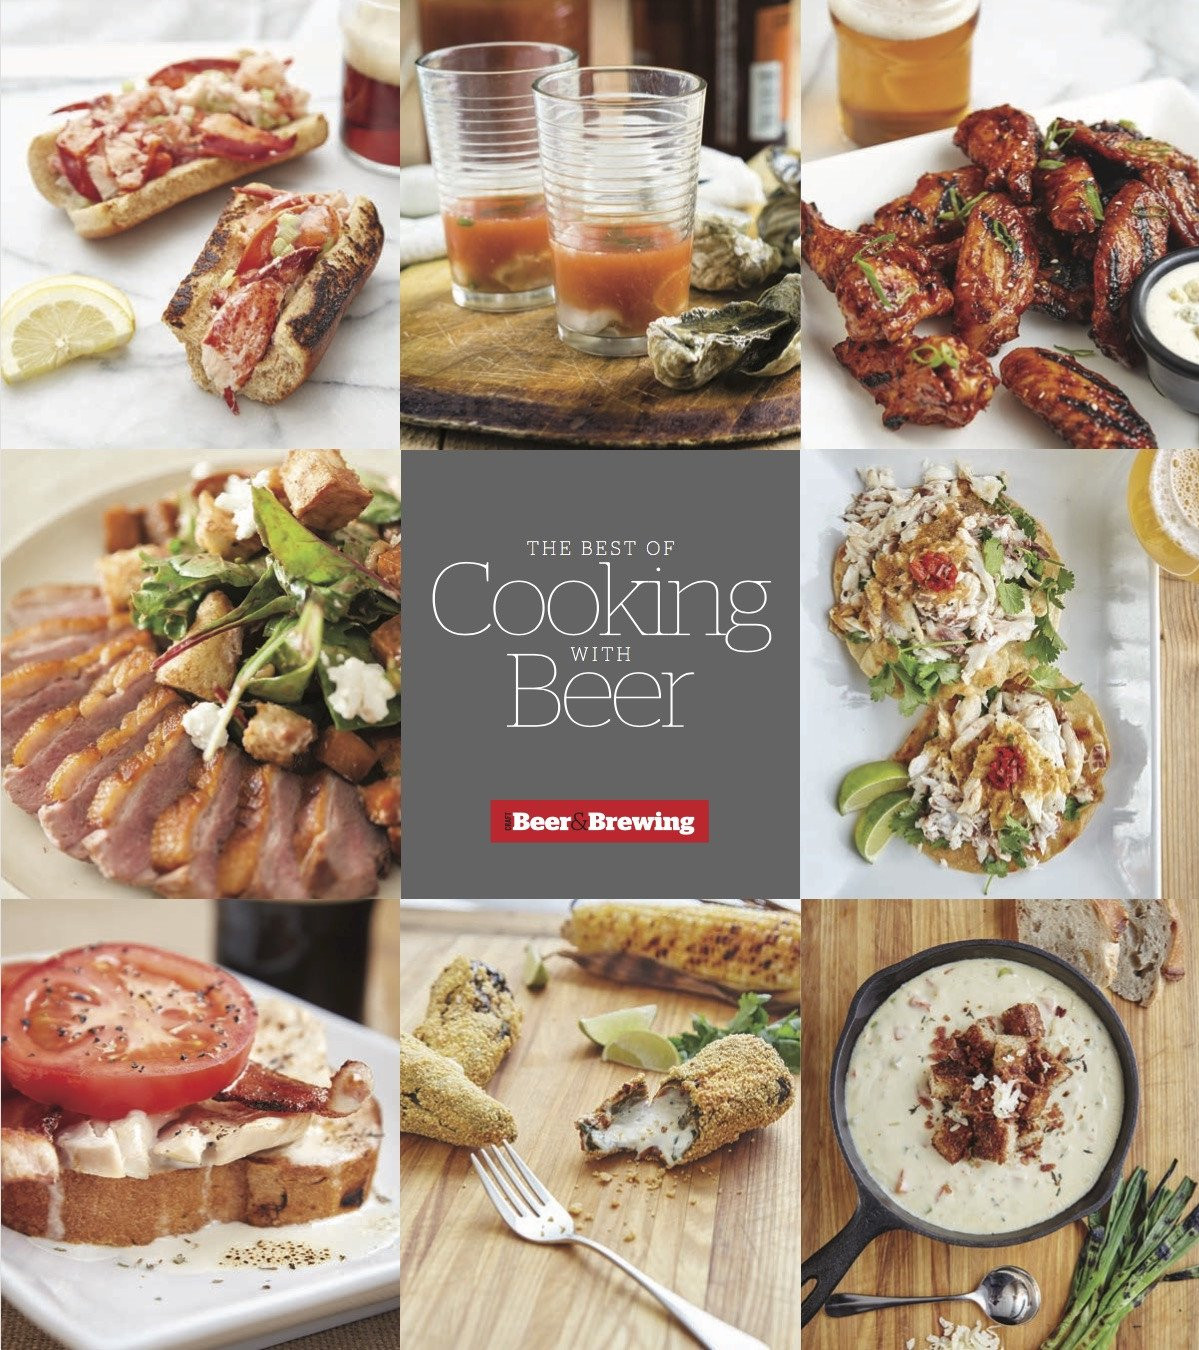 The Complete Cooking For Two Cookbook Pdf
 The Best of Cooking with Beer Cookbook PDF Download